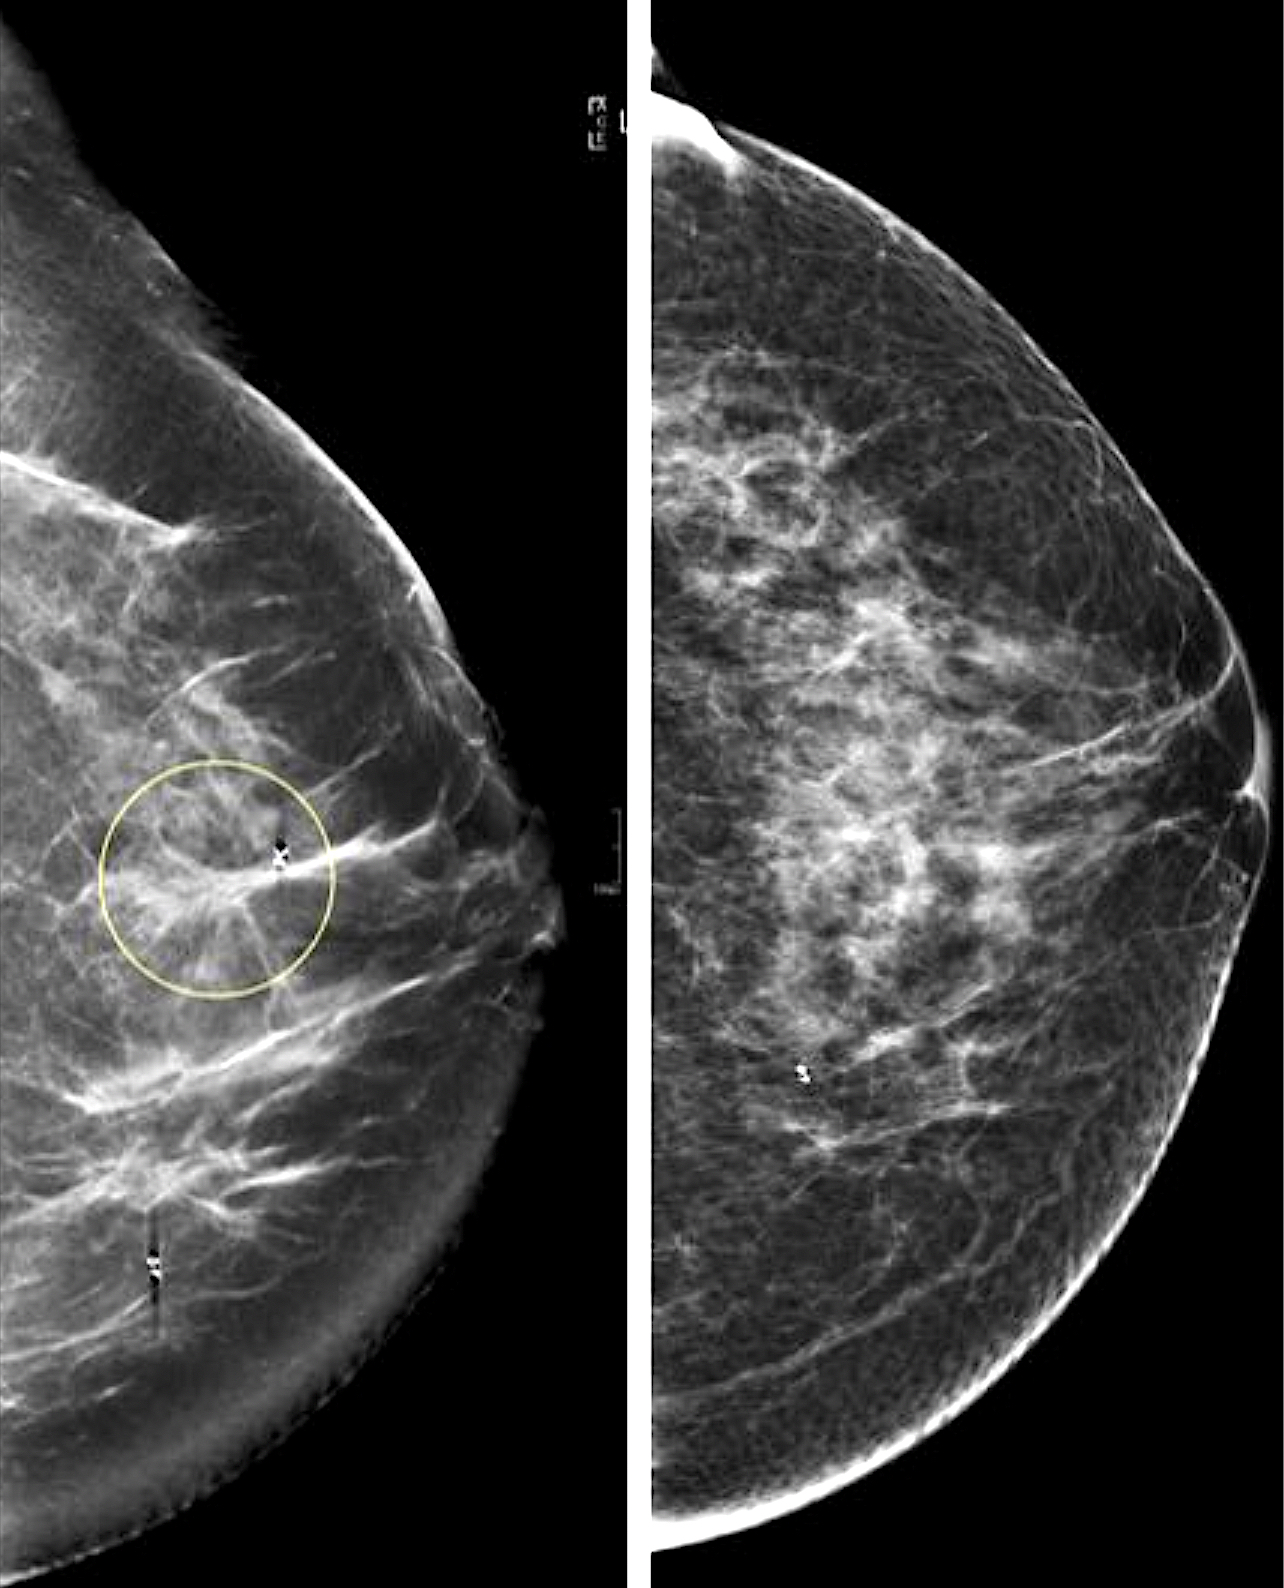 Before and After Complex Breast Patient 36 Photos